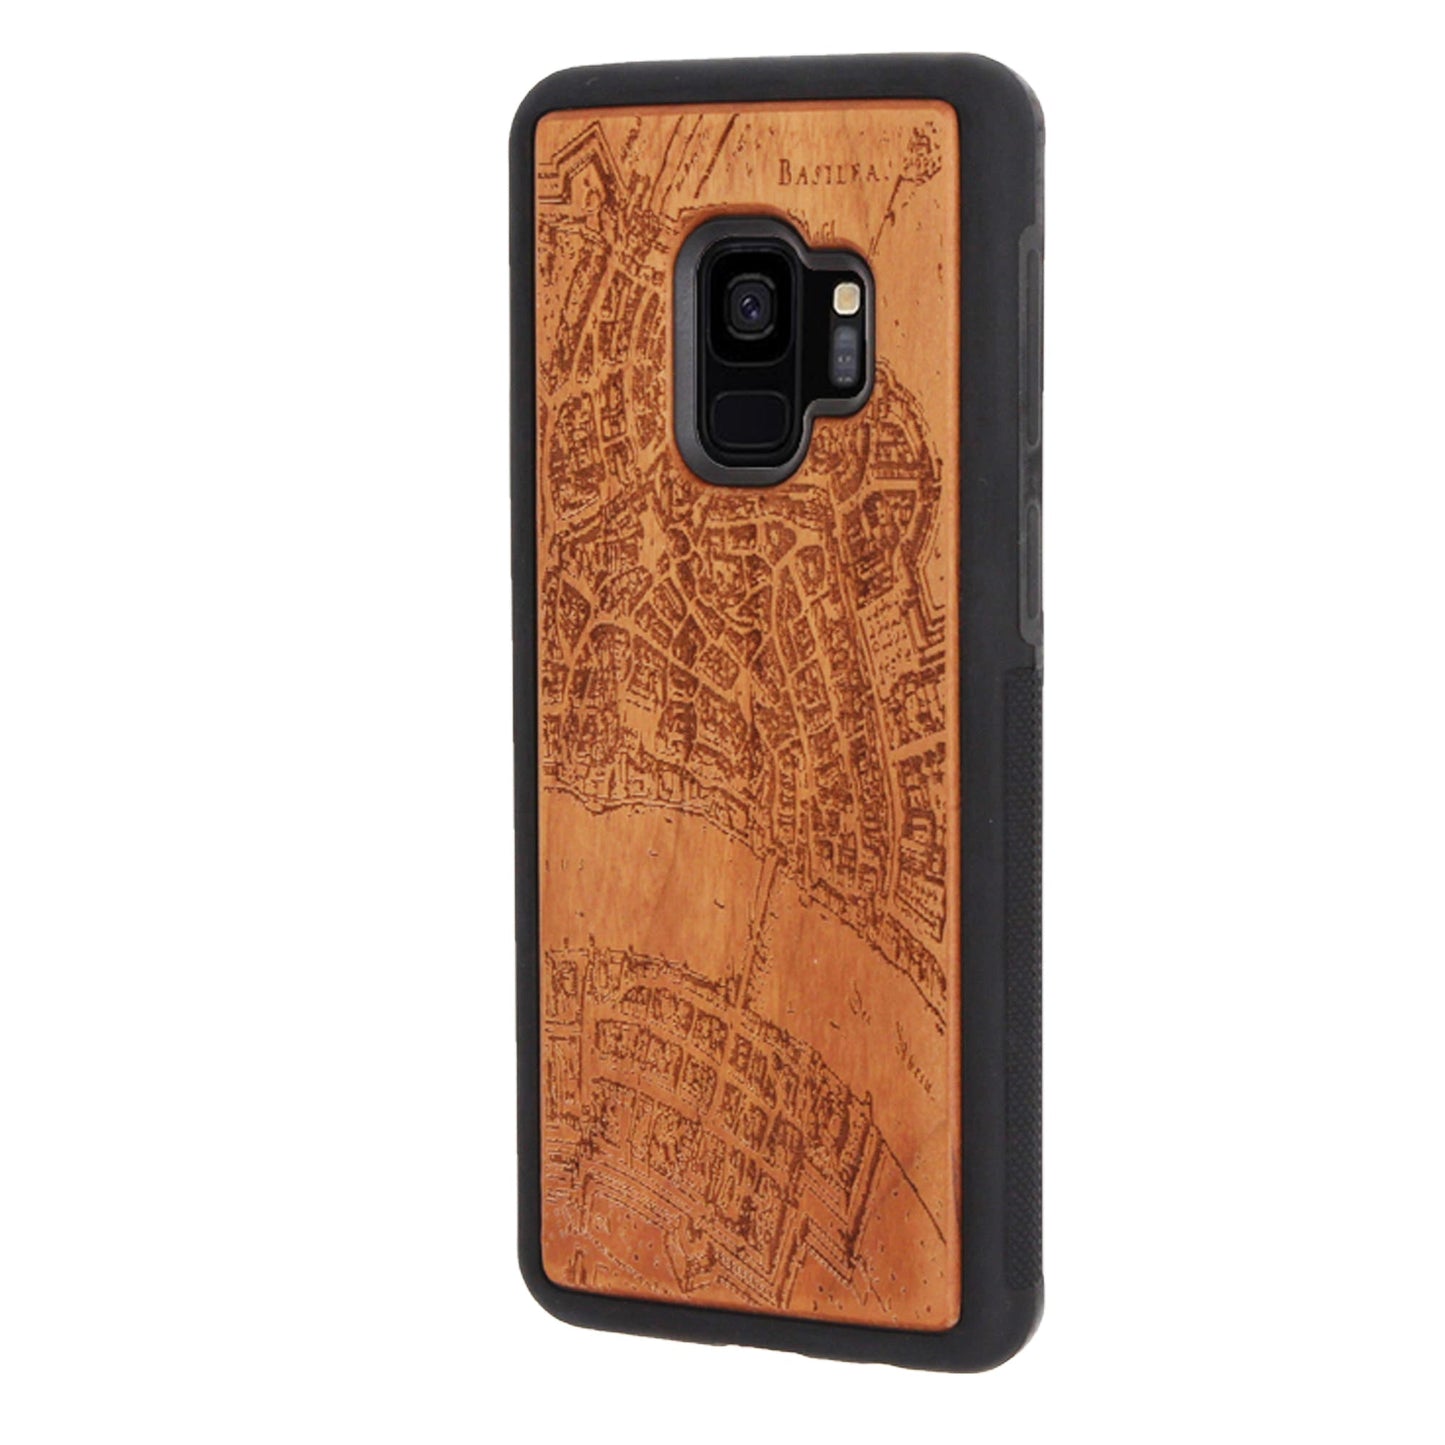 Basel Merian Eden case made of cherry wood for Samsung Galaxy S9